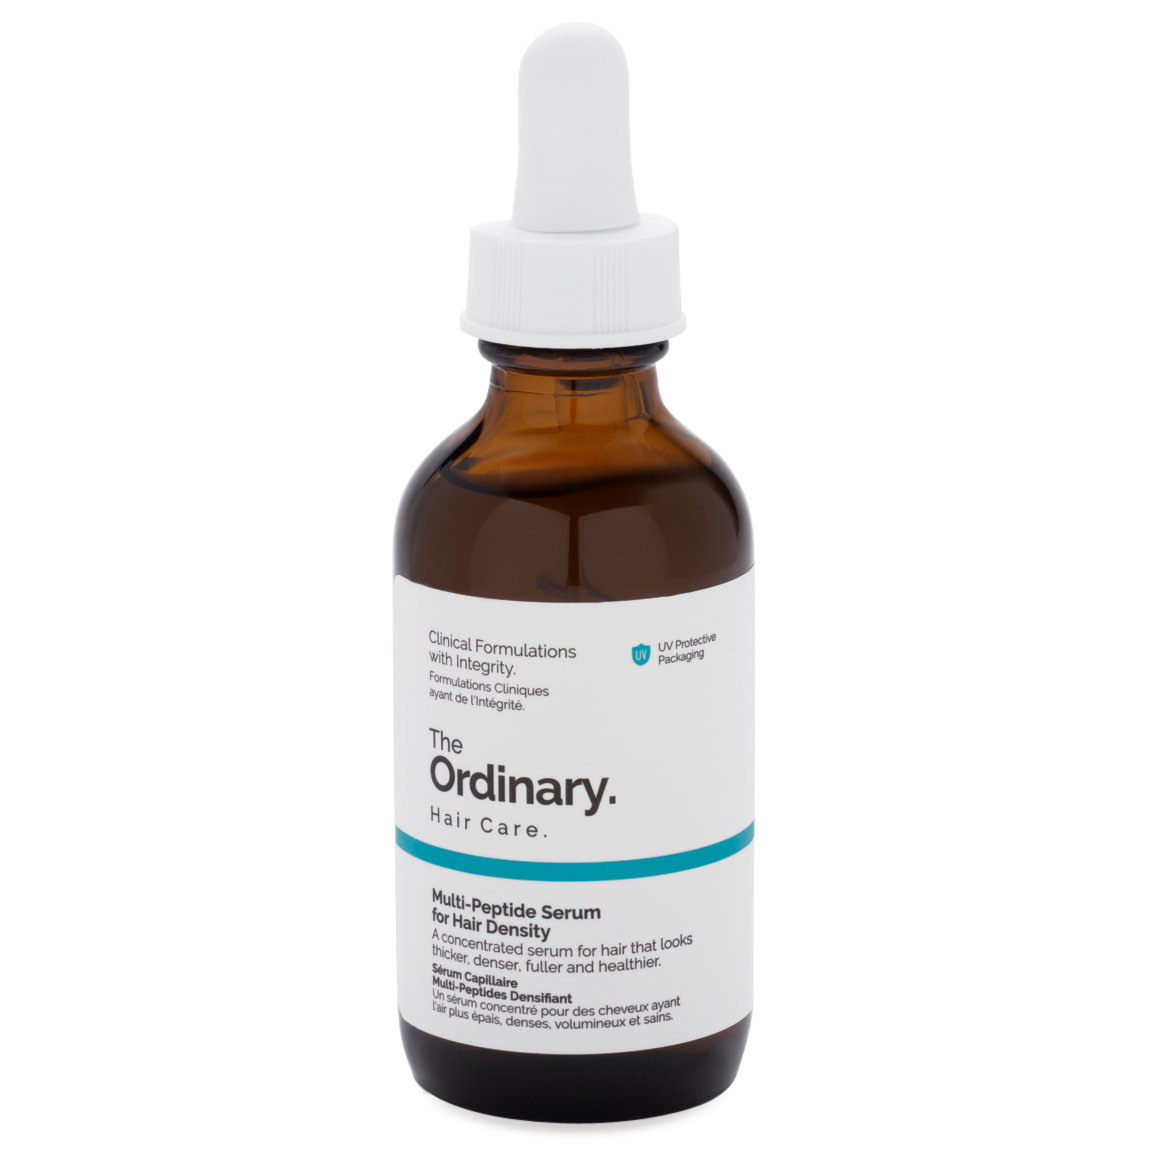 The Ordinary. Multi-Peptide Serum for Hair Density alternative view 1 - product swatch.